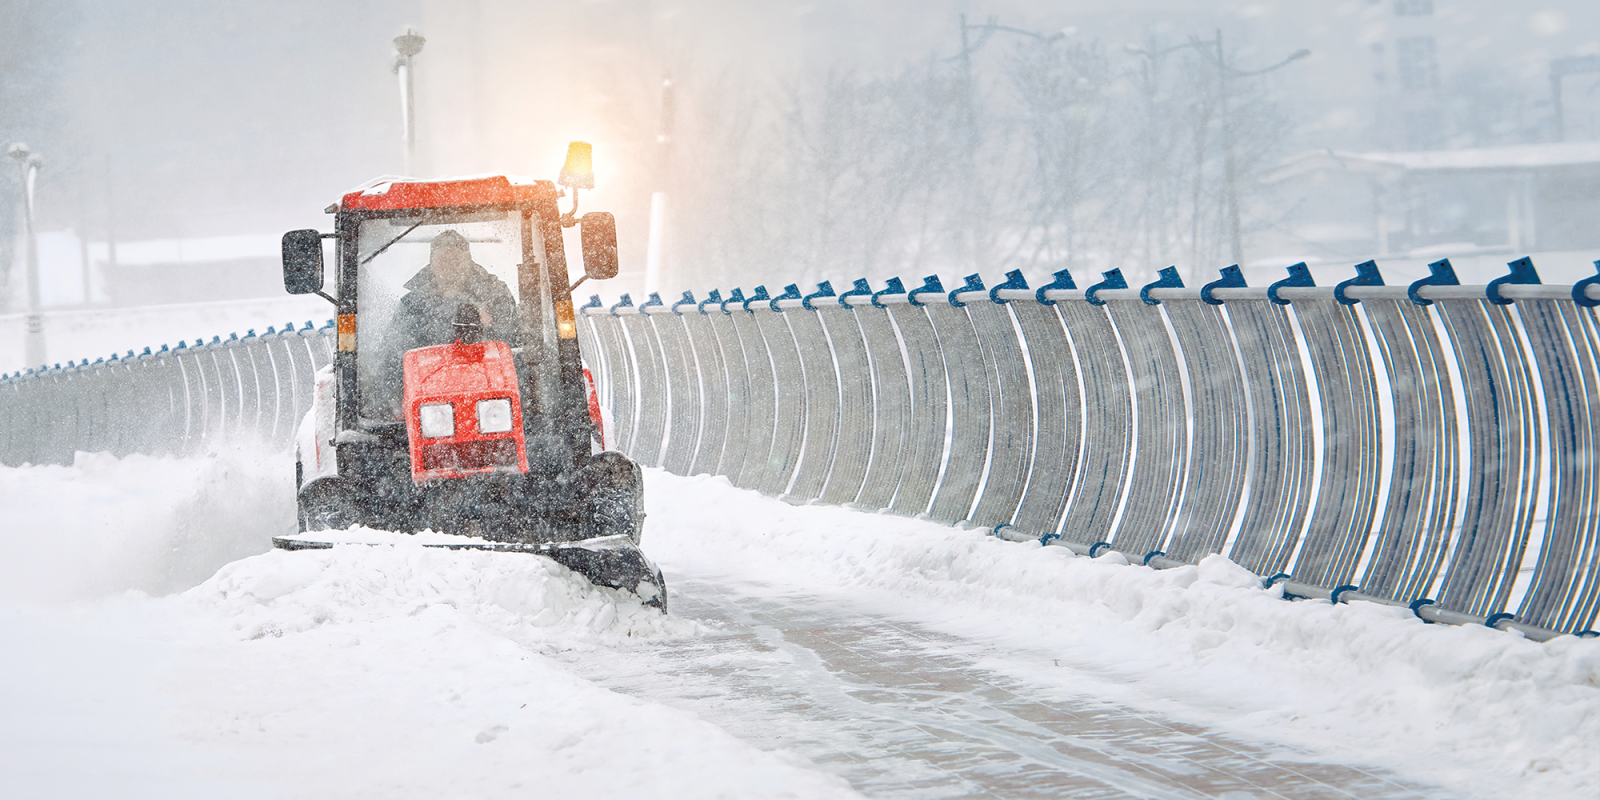 Moving the snow and ice industry forward